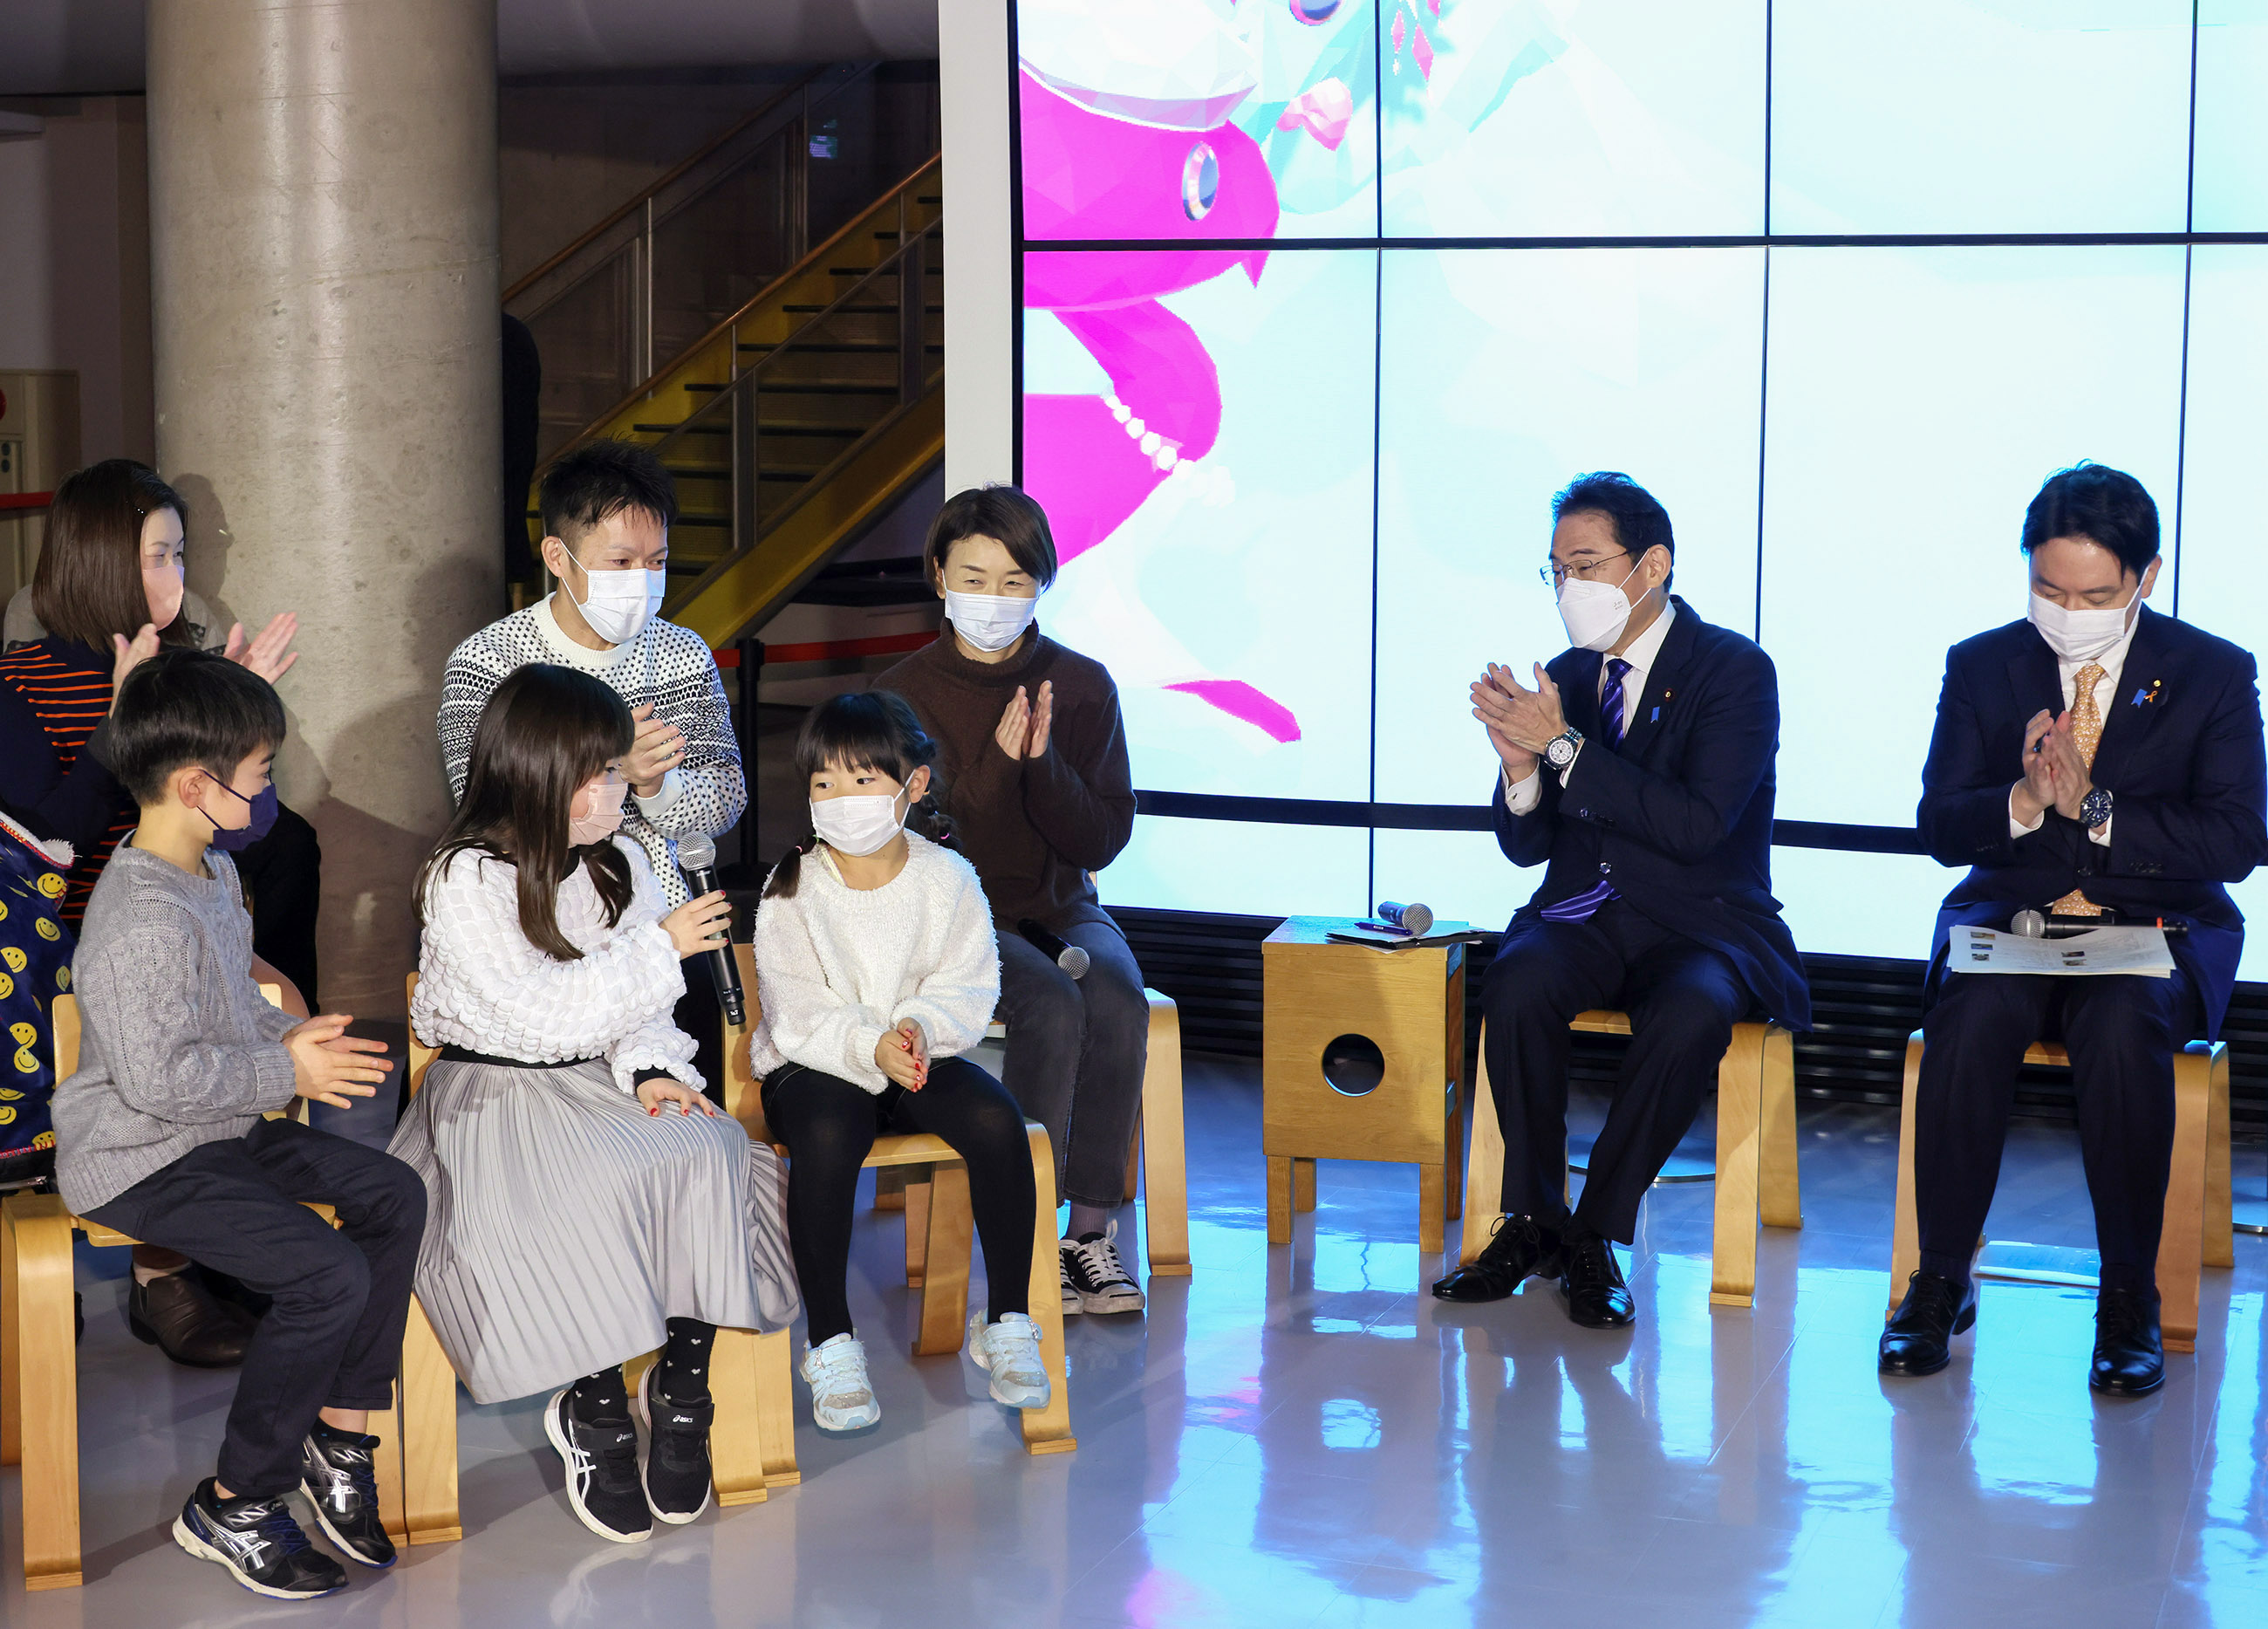 Prime Minister Kishida listening to other participants in a public dialogue on policies related to children (3)